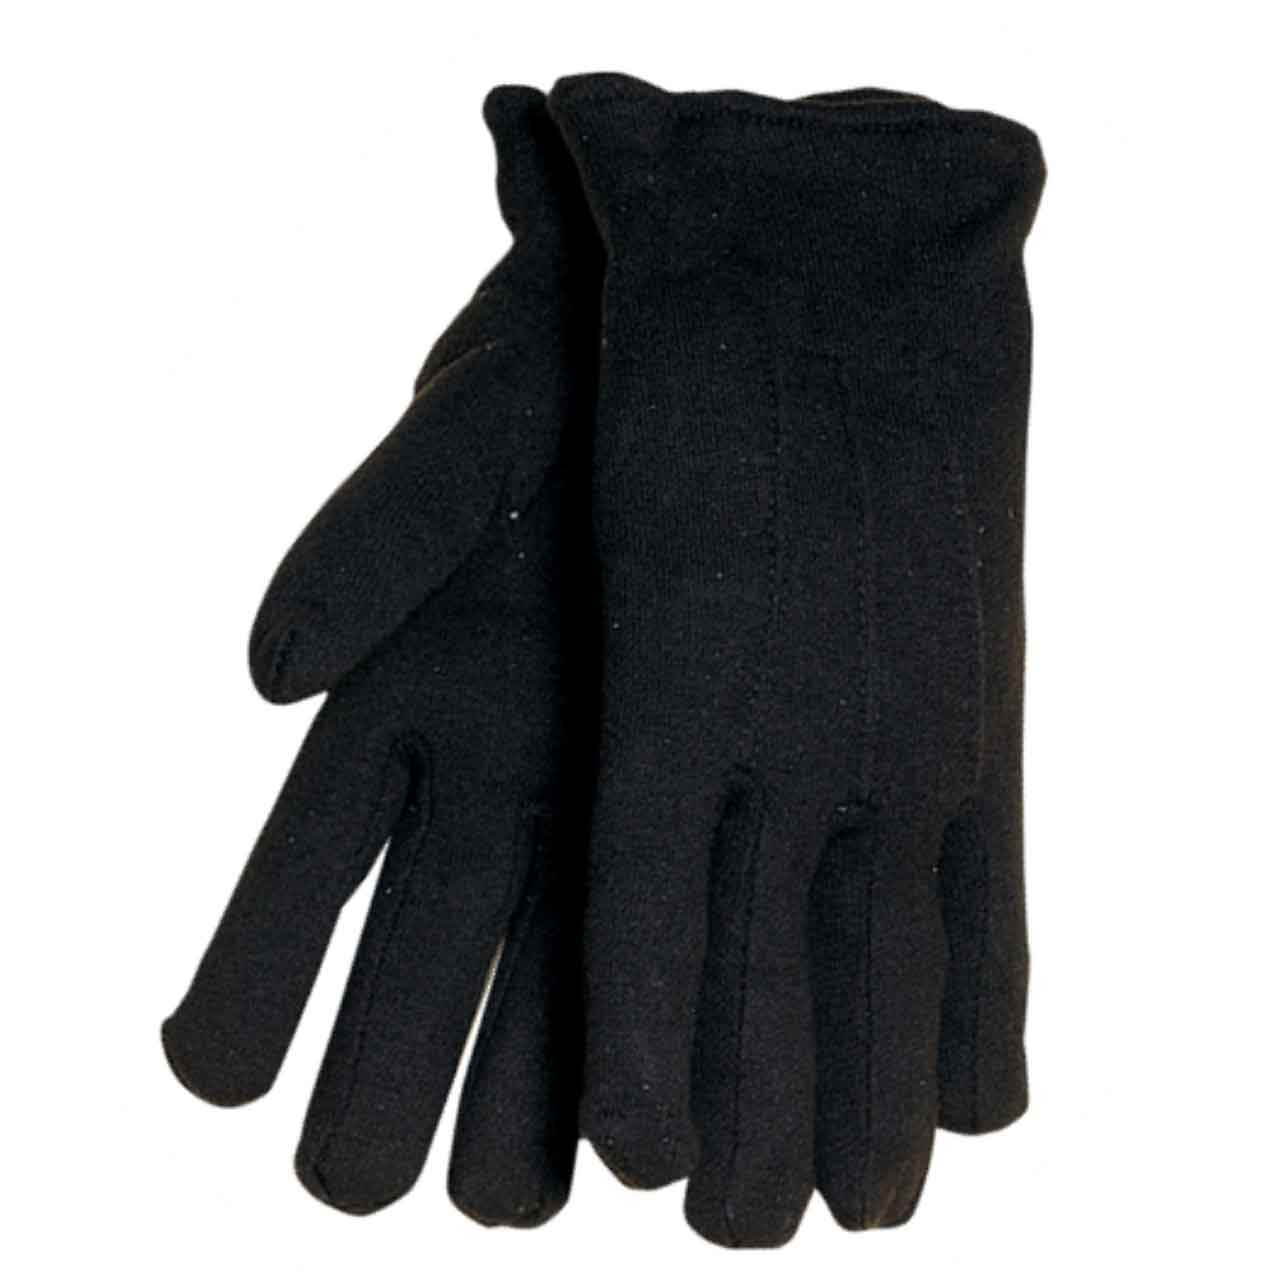 Do it Men's Large Lined Jersey Work Glove with Knit Wrist